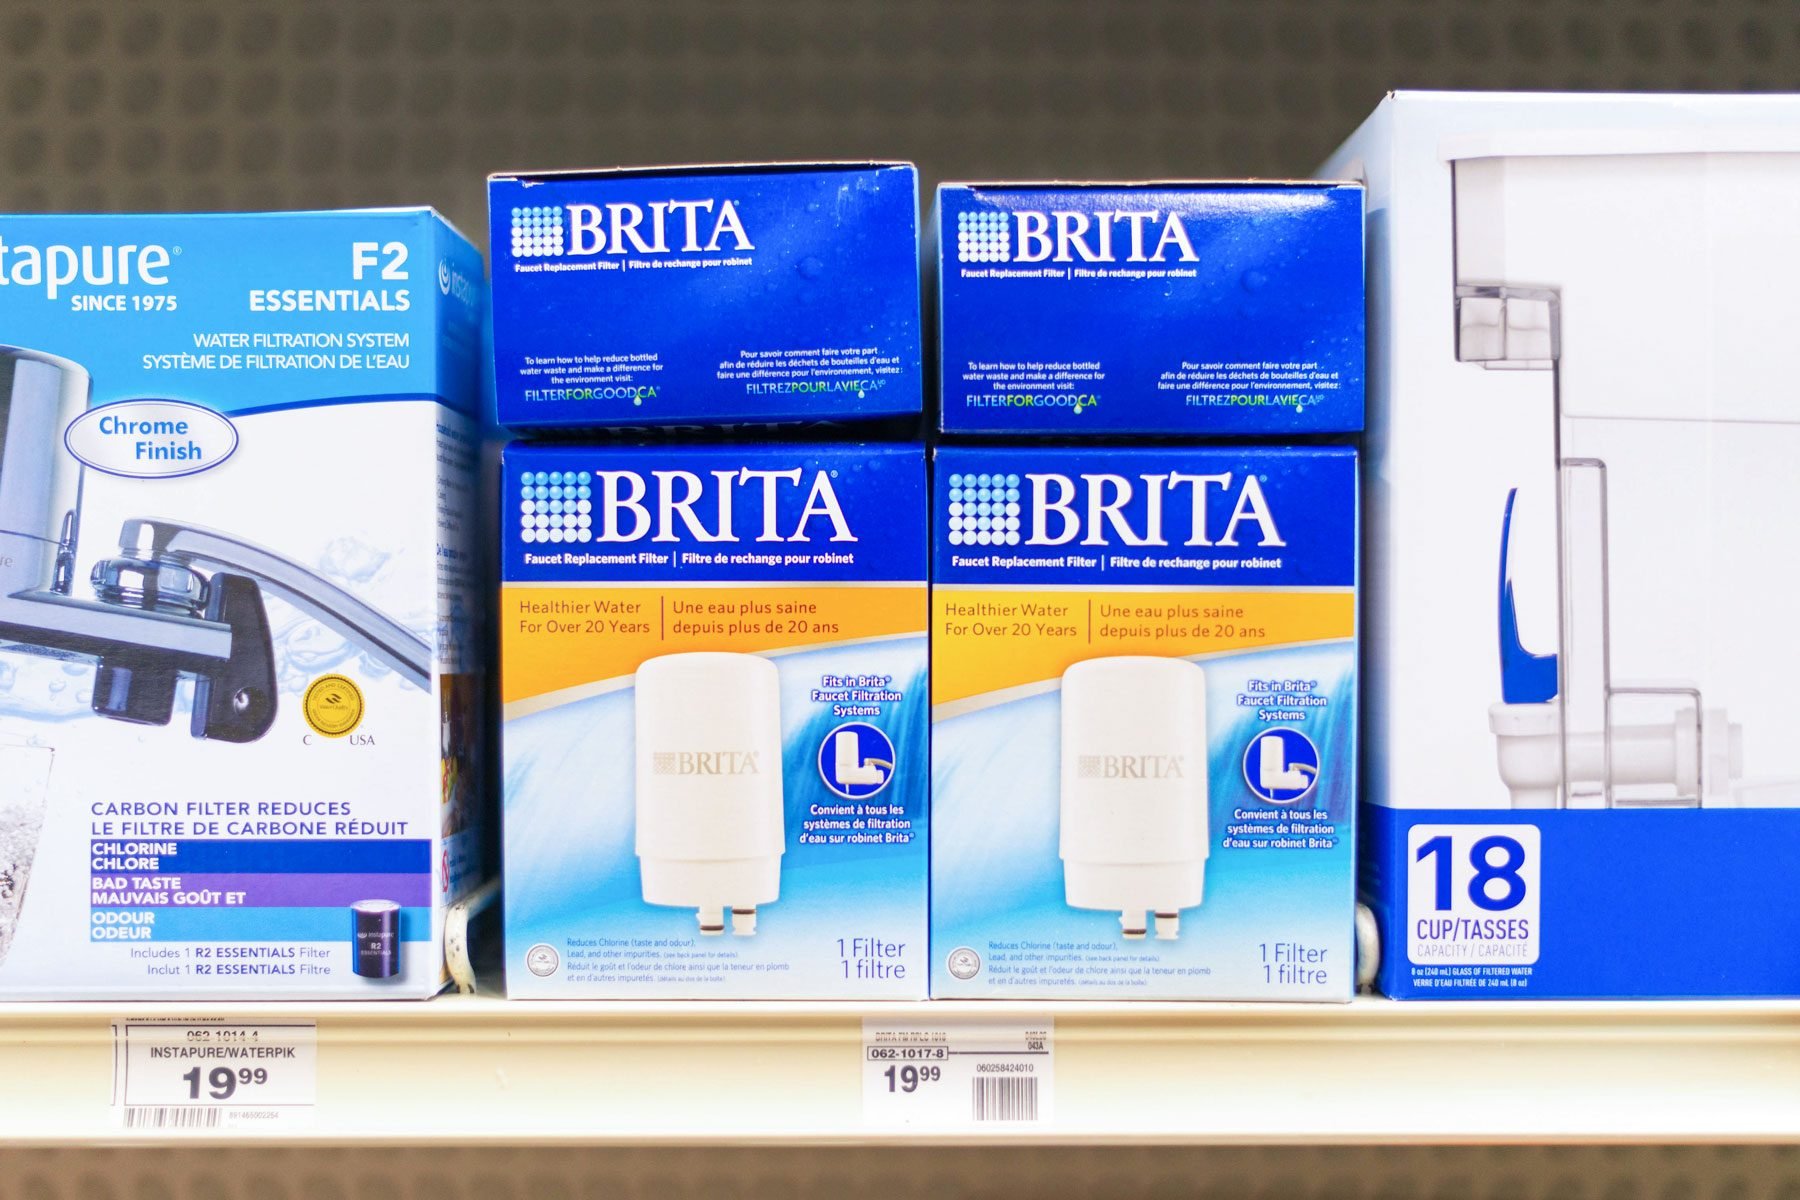 https://www.thehealthy.com/wp-content/uploads/2023/08/brita-filter-lawsuit-GettyImages-528590156_MLedit.jpg?fit=700,467